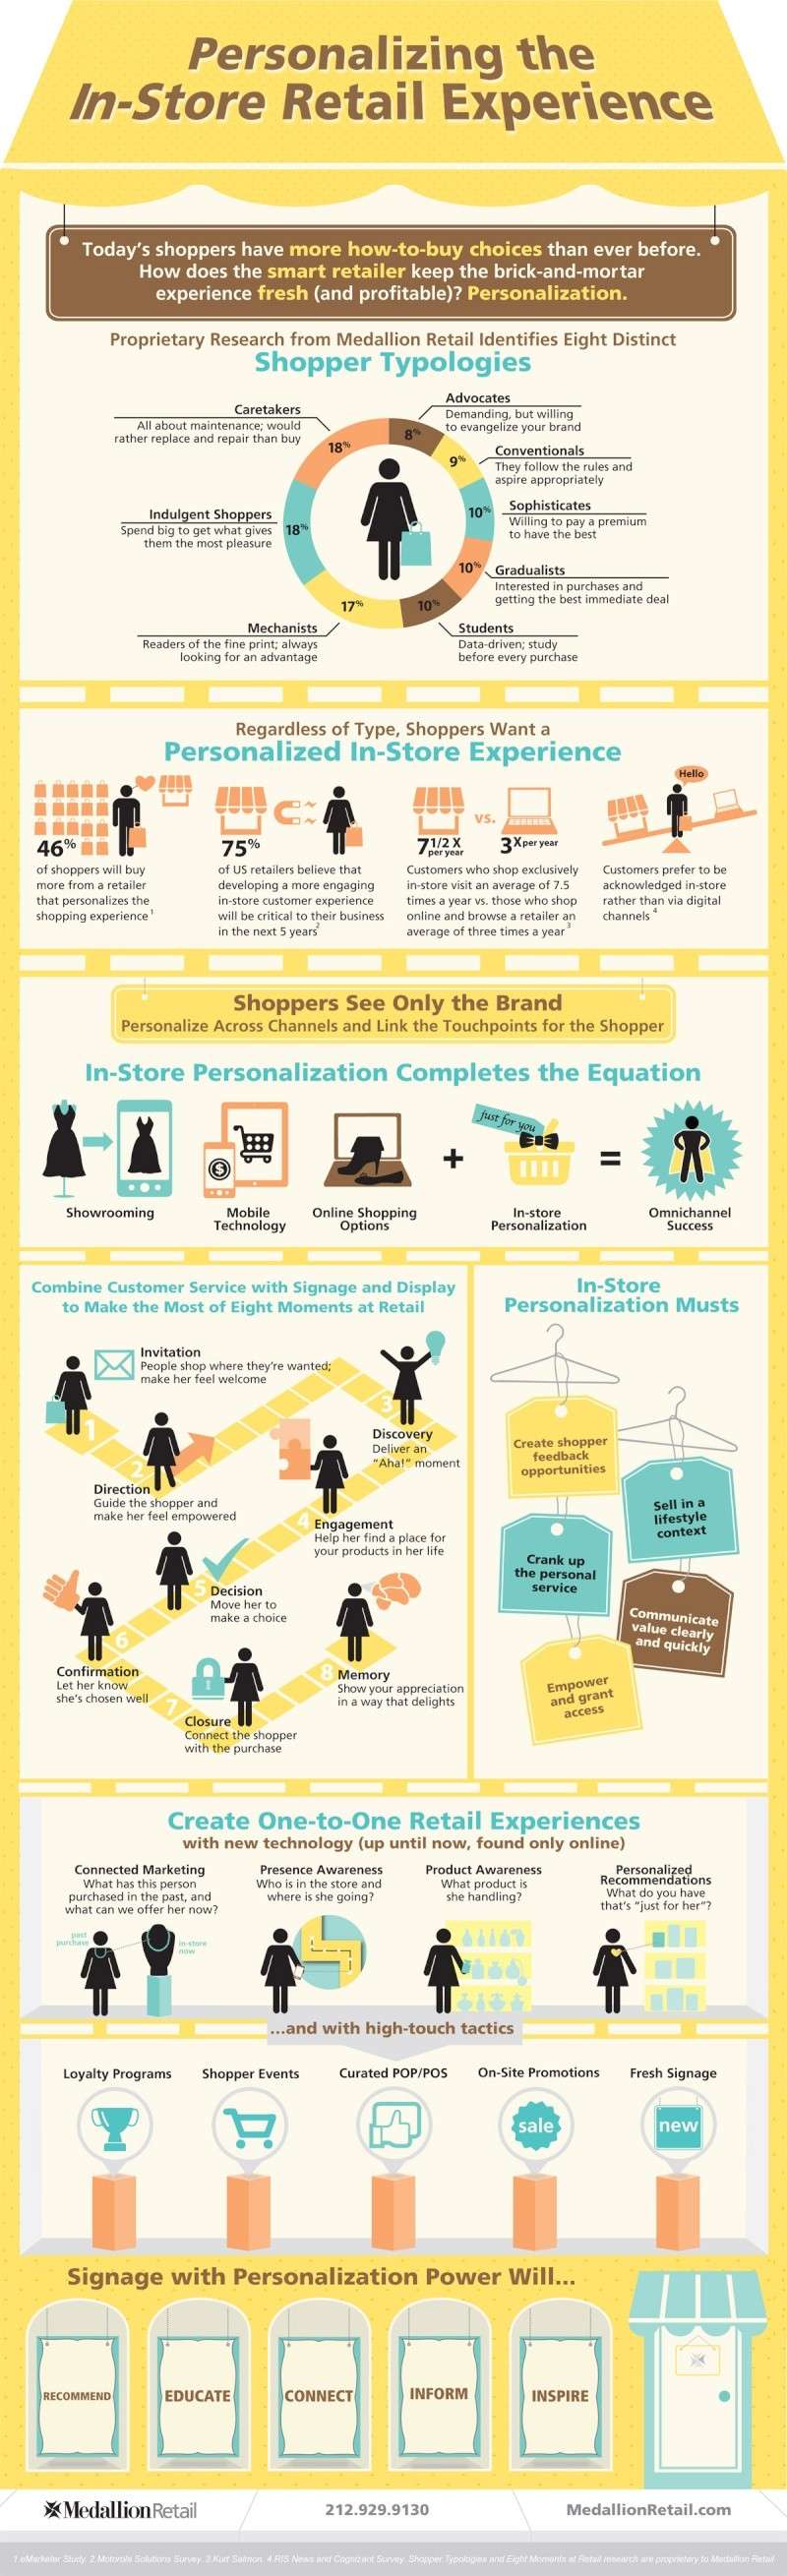 Retail: It's Personal (Infographic)  Retail10